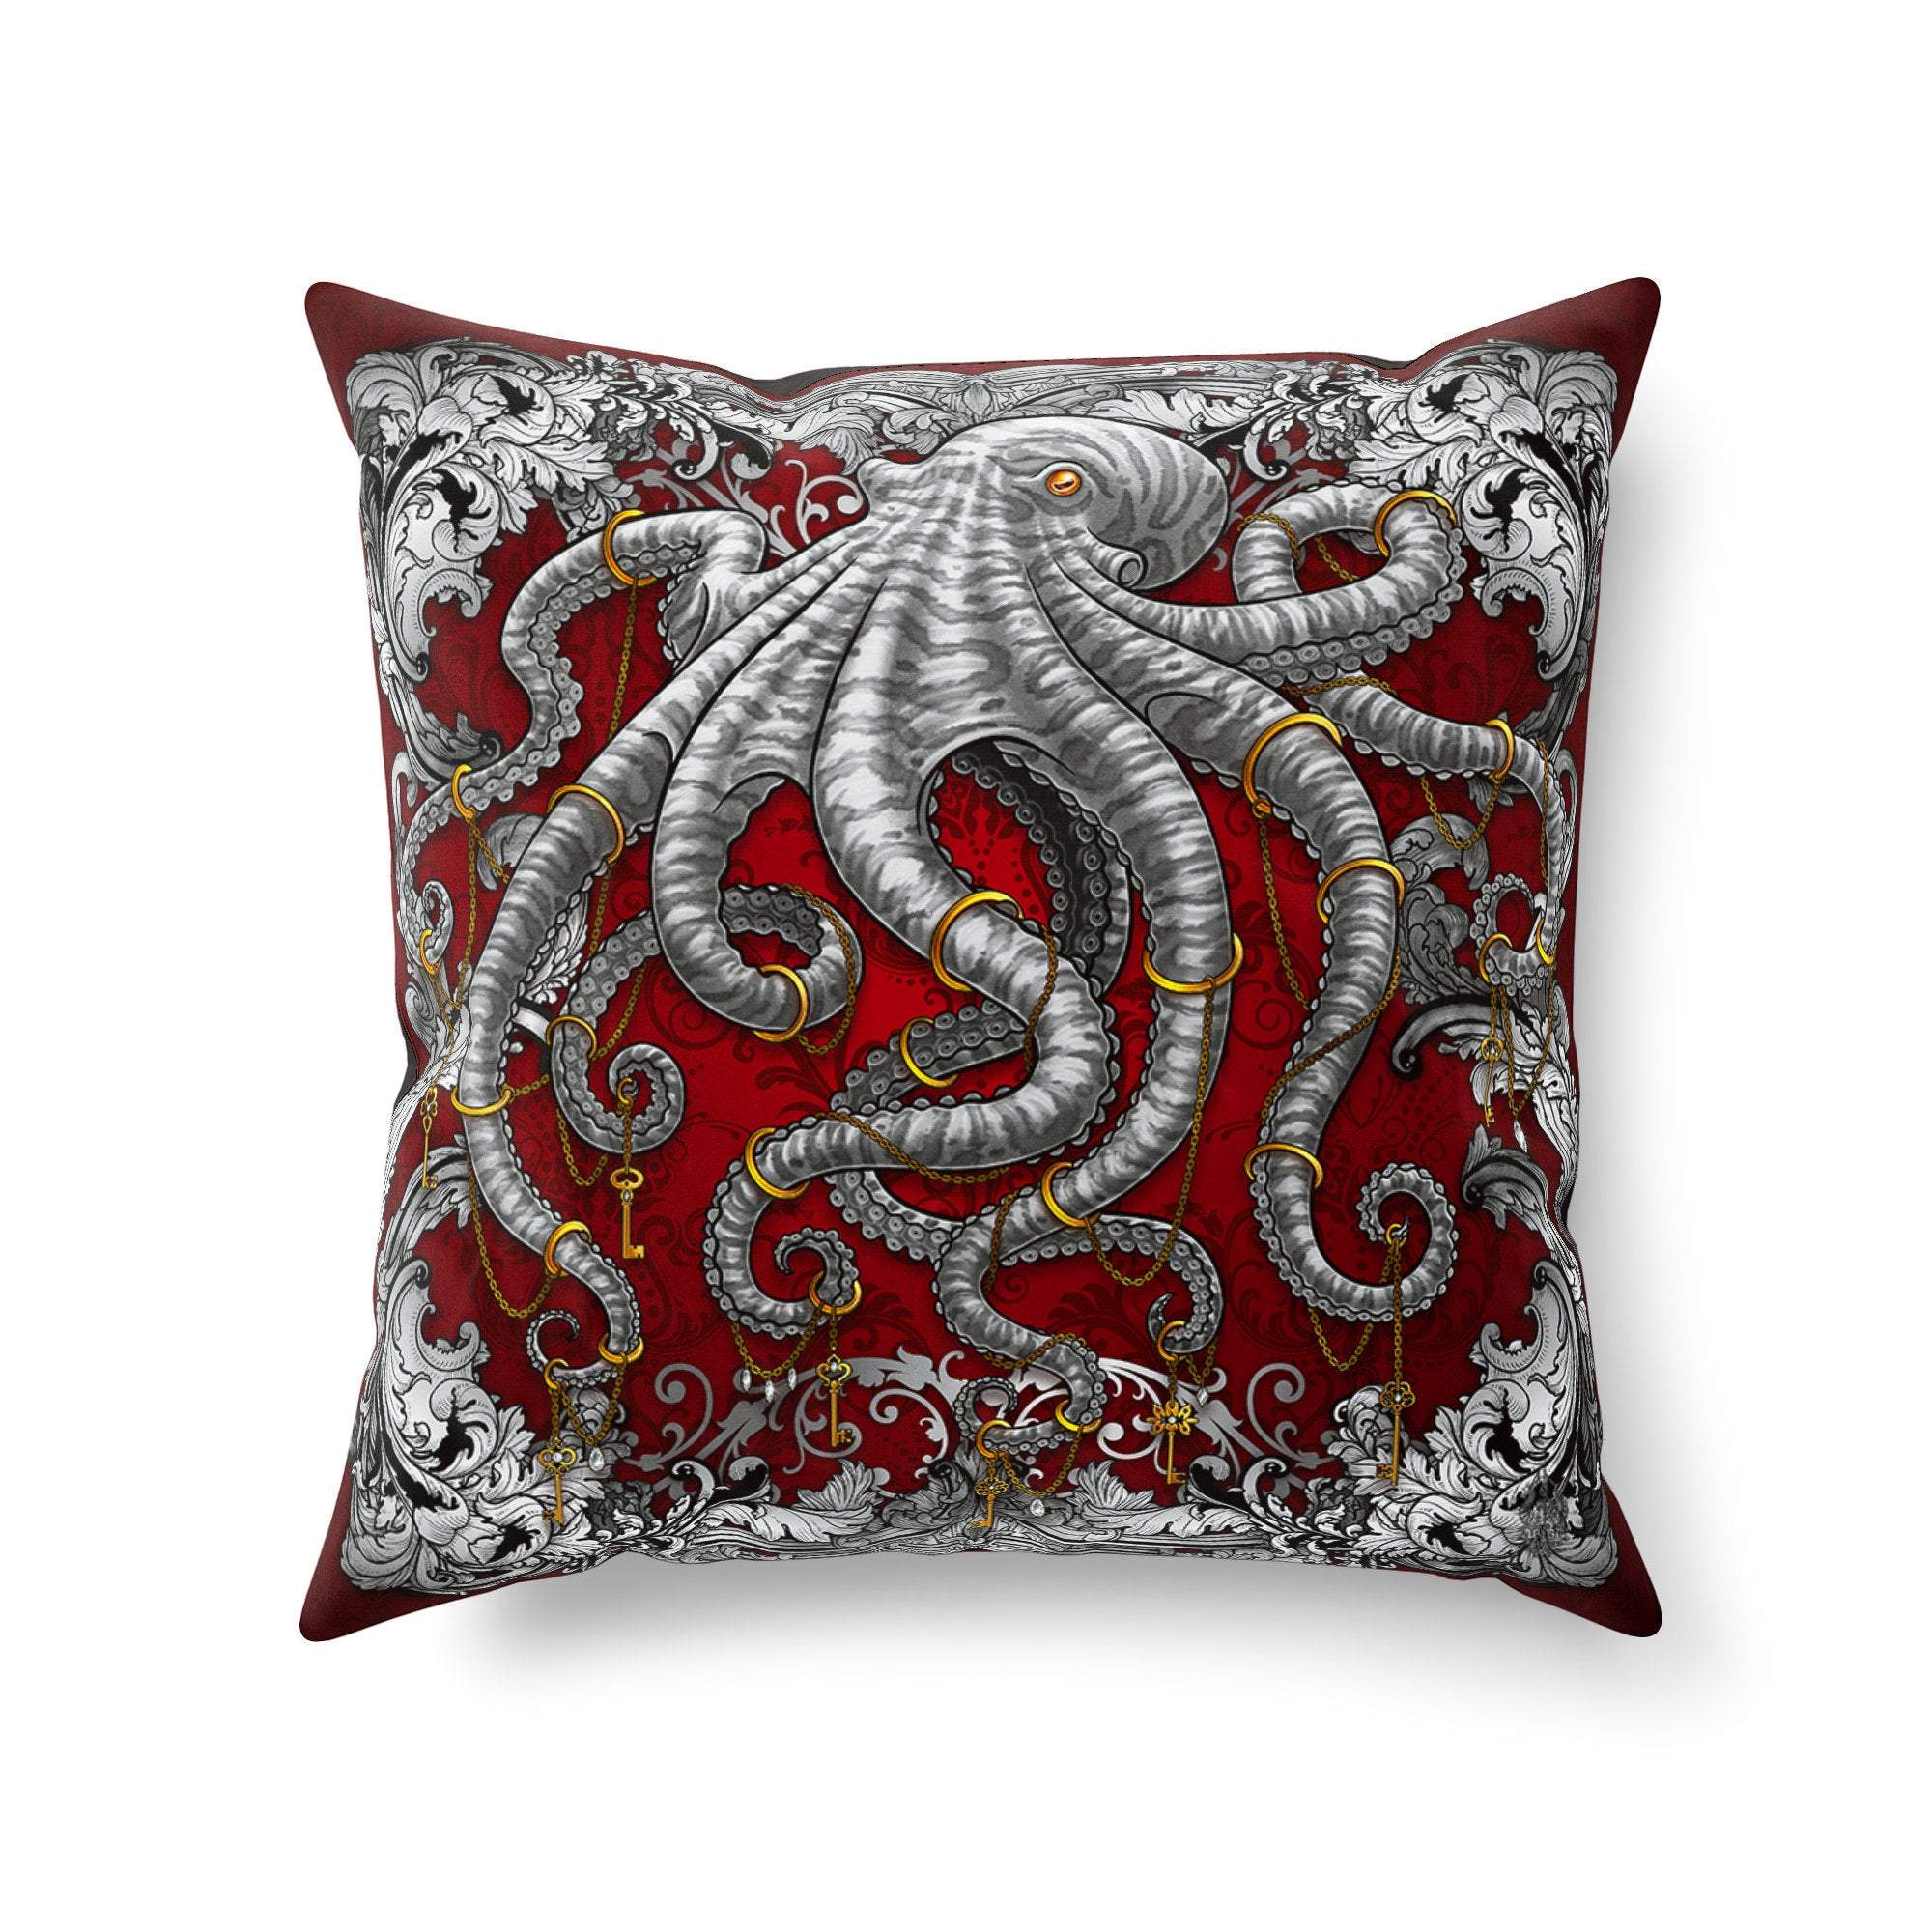 Octopus Throw Pillow, Decorative Accent Cushion, Coastal Home Decor, Indie and Eclectic Design, Alternative - Silver & Red - Abysm Internal